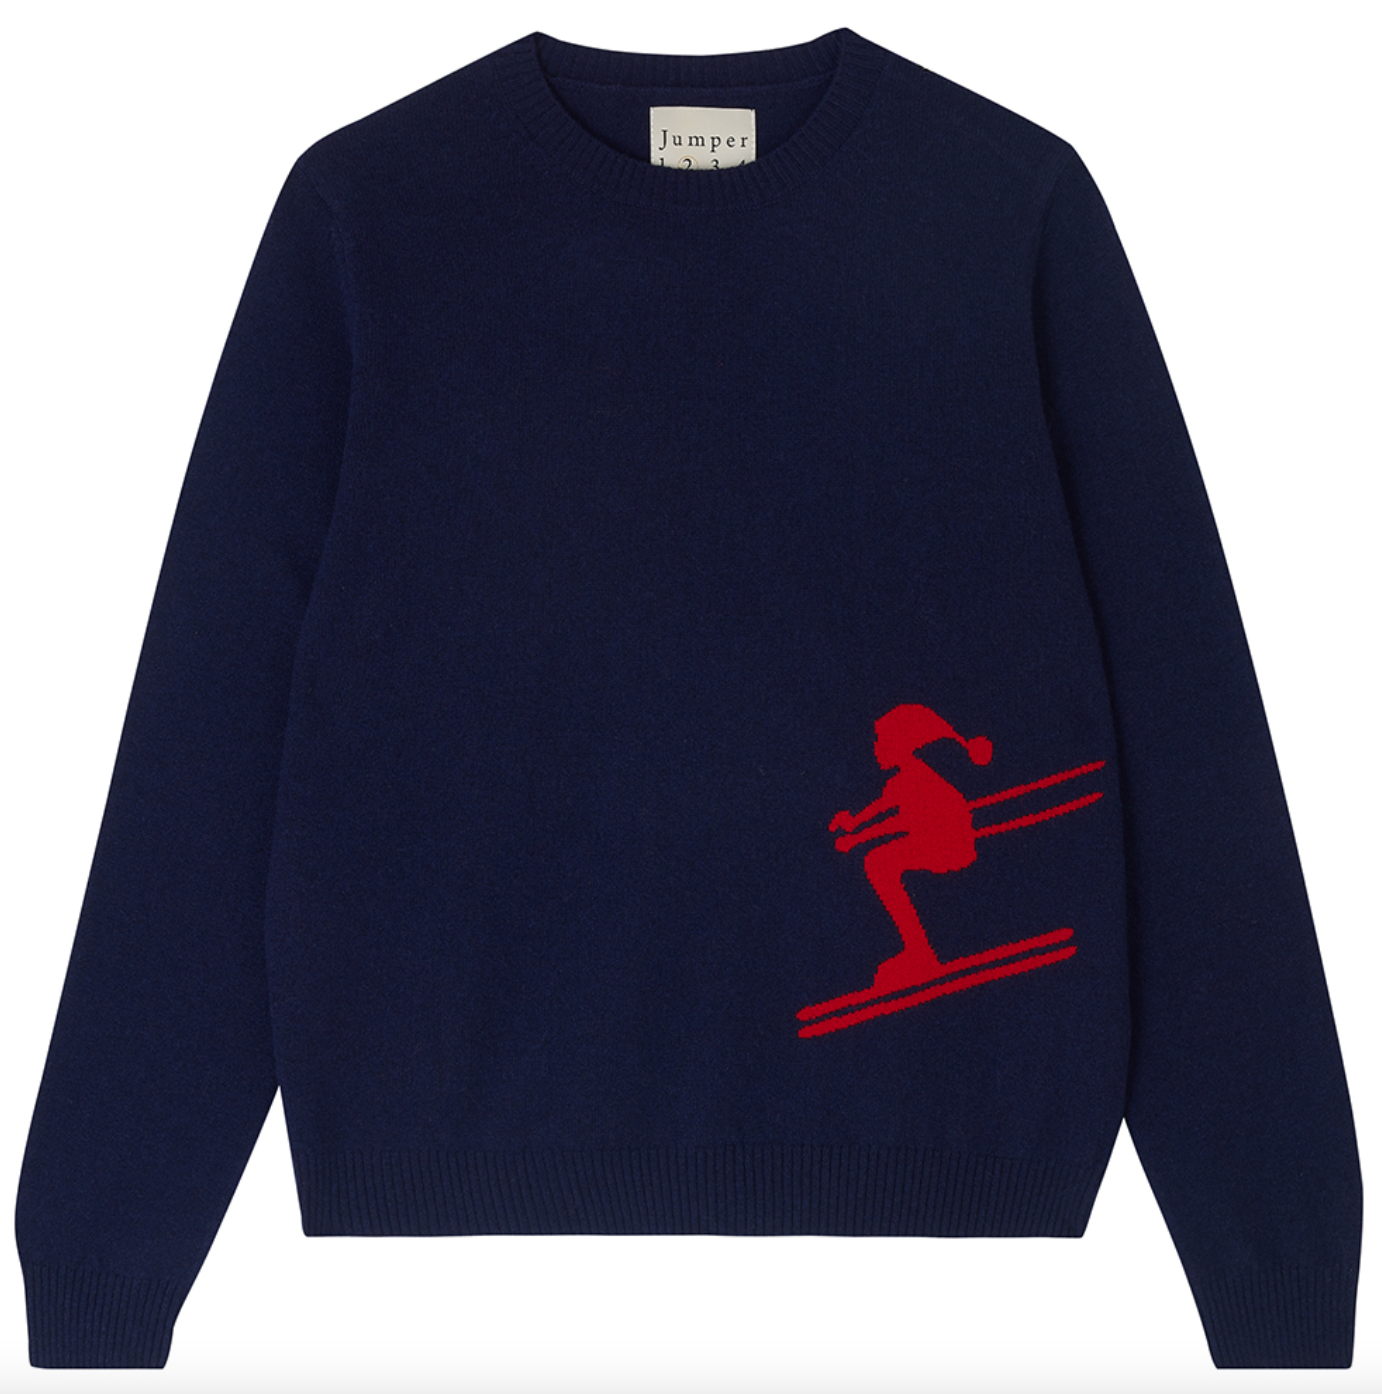 ski cashmere crew in navy with red